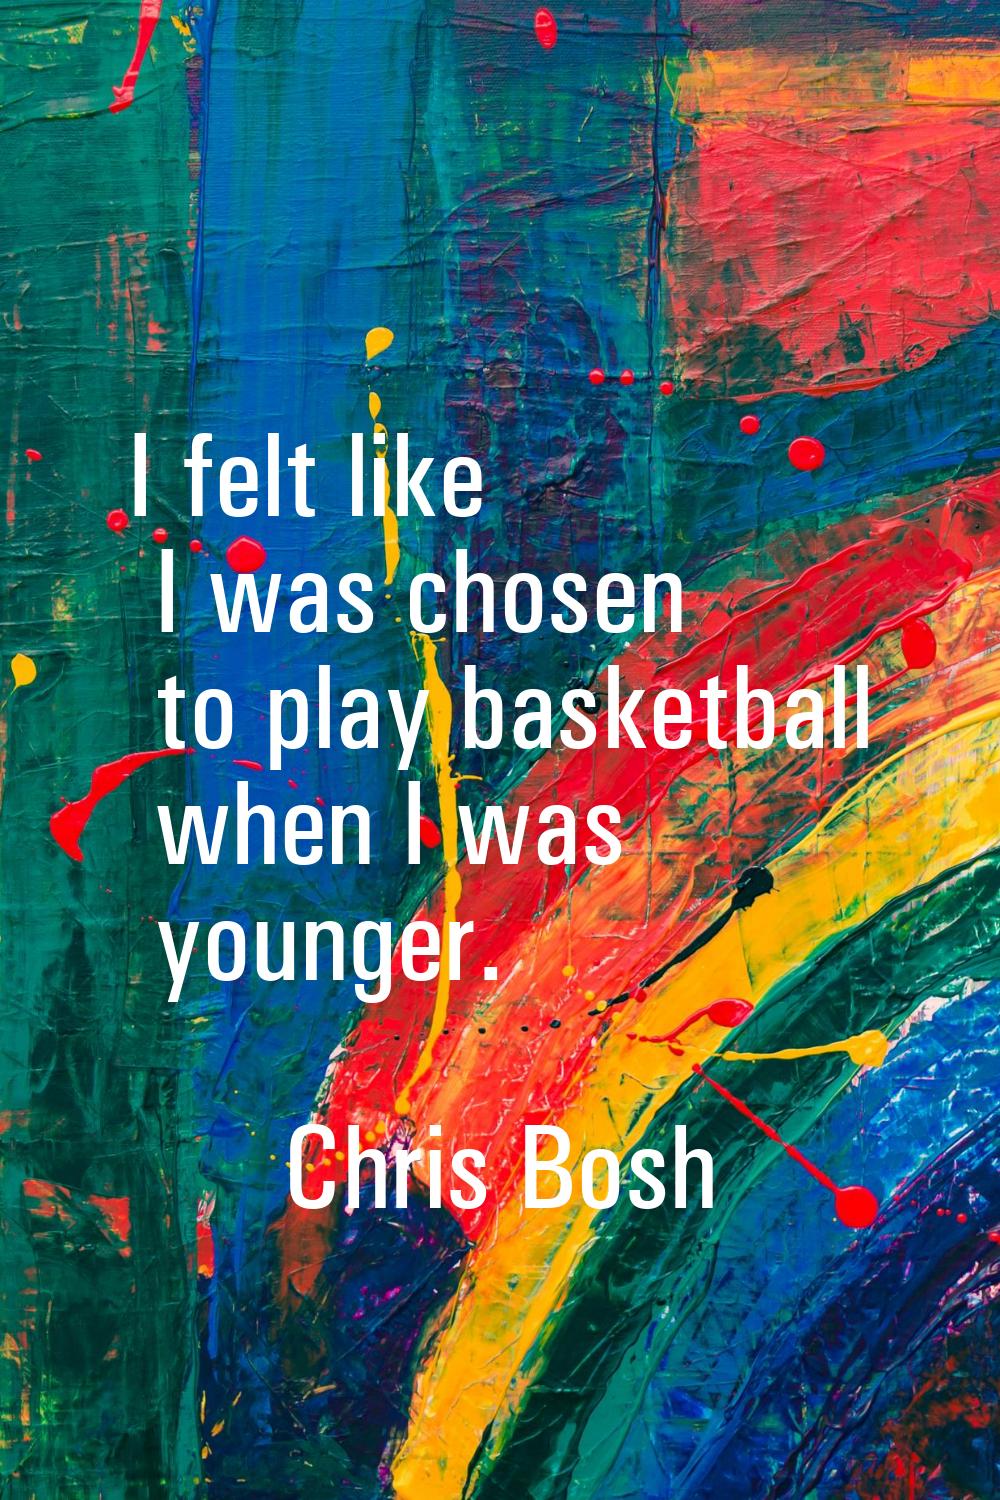 I felt like I was chosen to play basketball when I was younger.